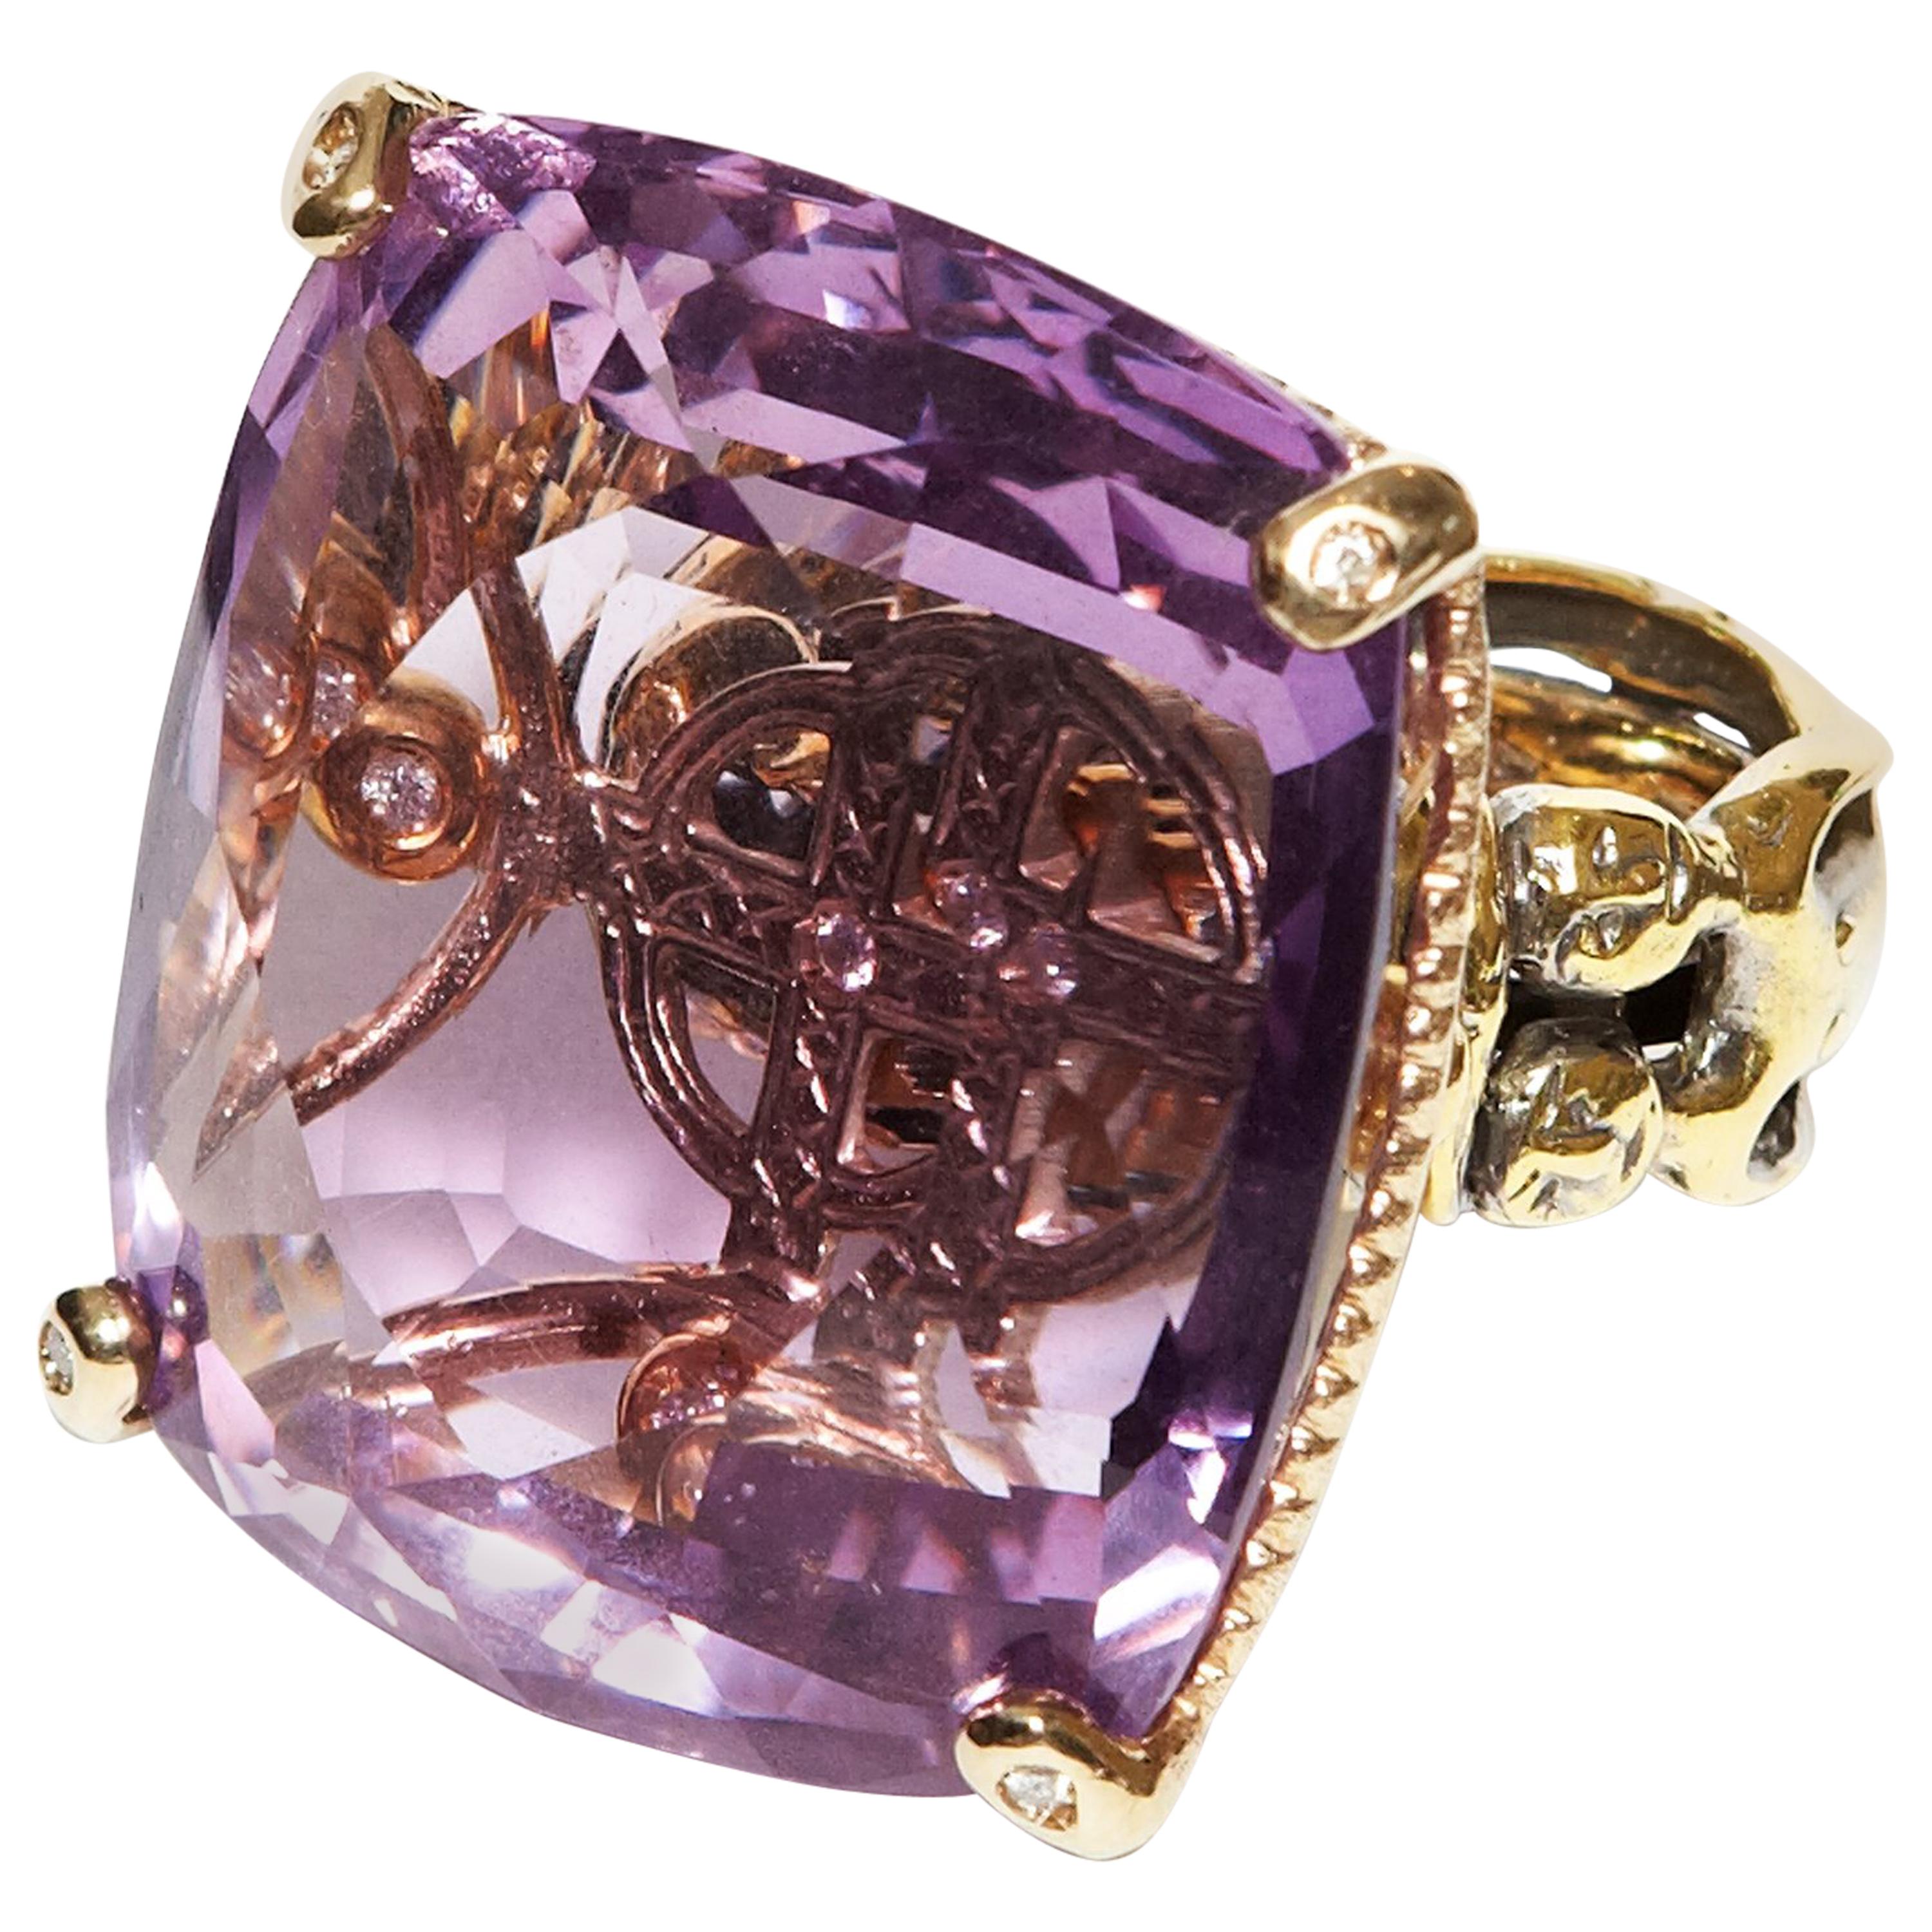 Helen Yarmak "Art of Love" Collection 18Kt Gold Amethyst and Diamond Ring For Sale